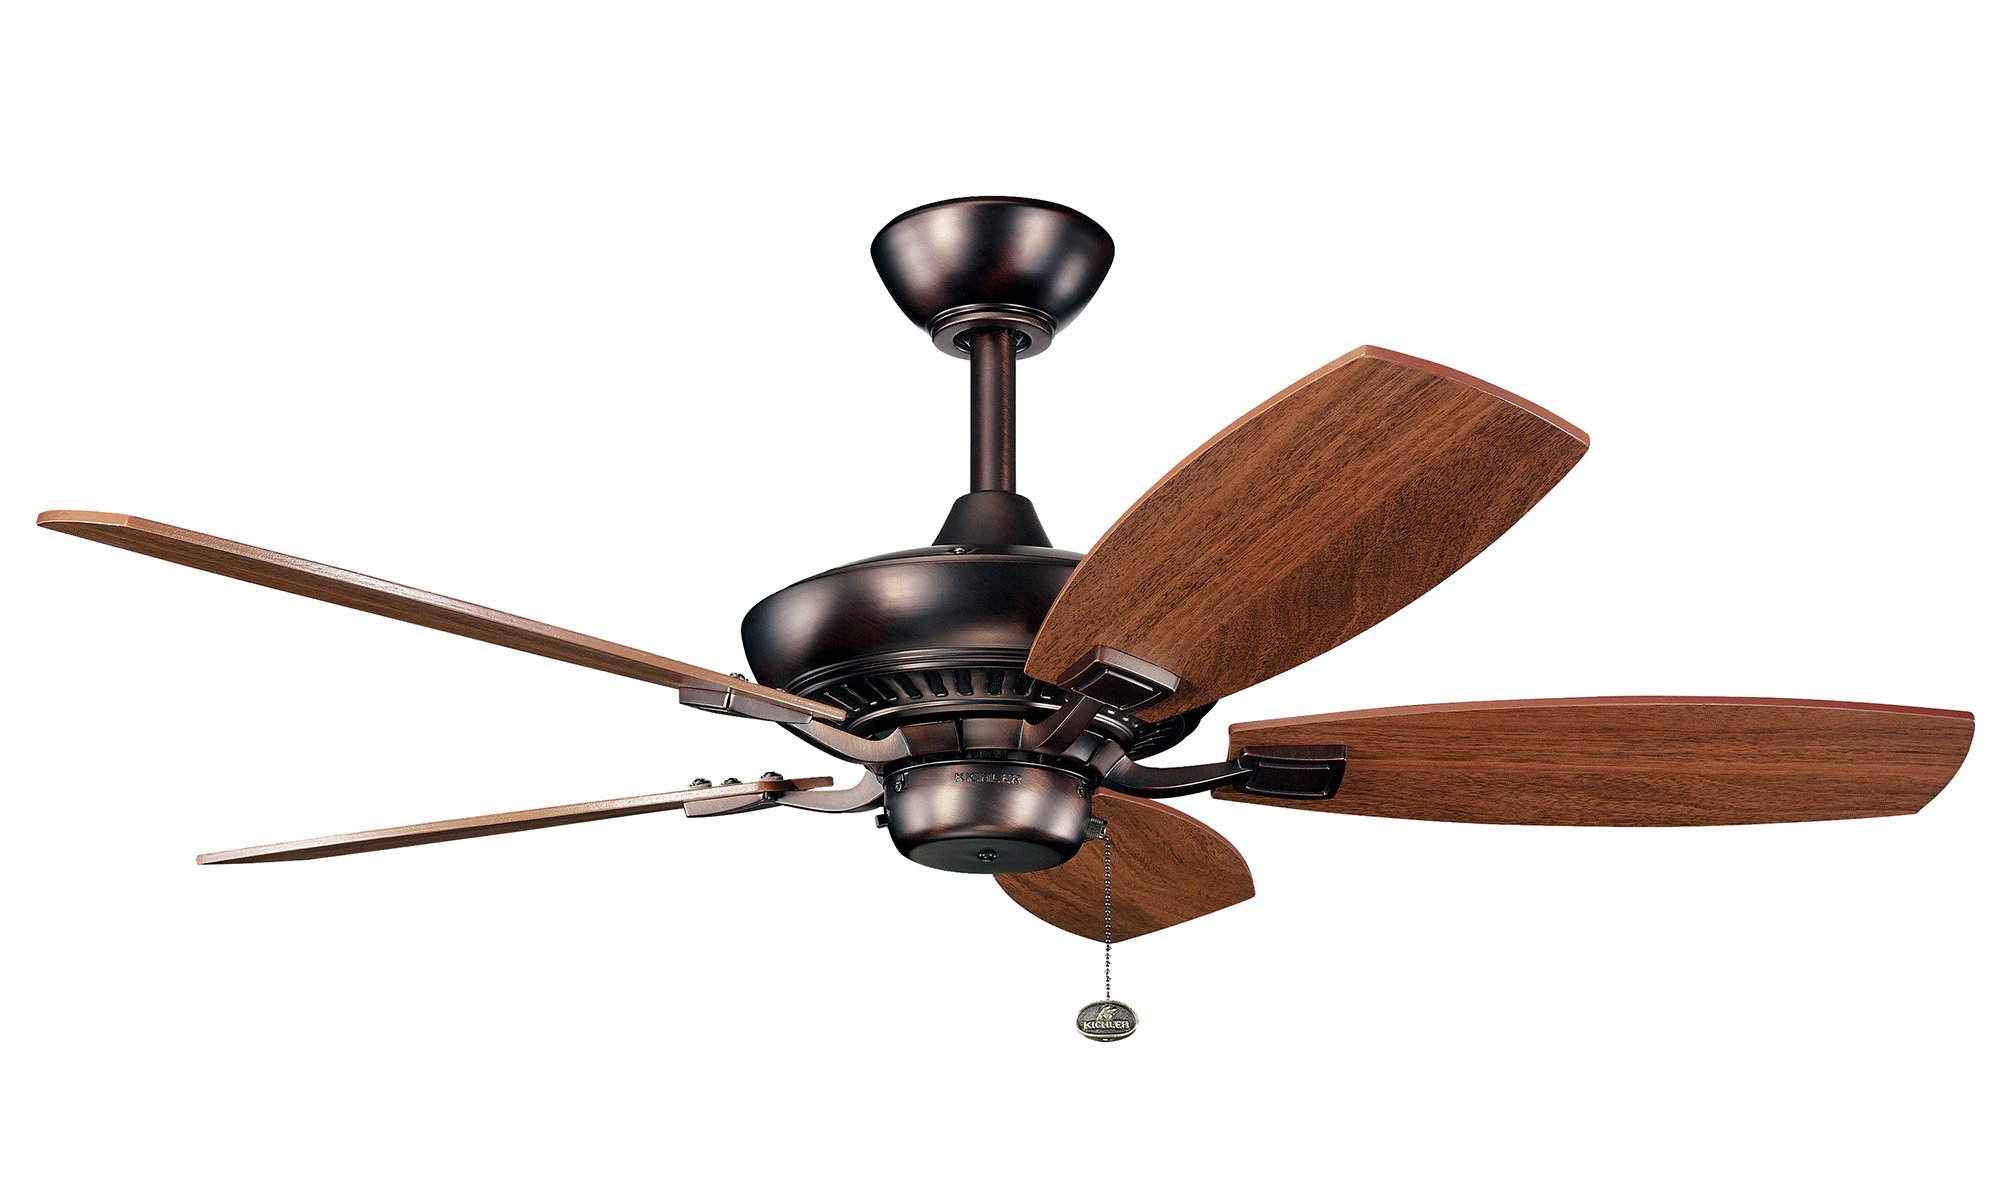 With an Oil Brushed Bronzeâ„¢ finish, this fan is a wonderful addition to the Kichler Canfieldâ„¢ Collection. The 5, 44in. blades are pitched 16 degrees and are reversible with Walnut and Cherry finishes. The 172mm x 20mm Motor will provide the quiet power you need.  This fan comes complete with a pull chain (3 speeds forward and reverse) and 1 6 inch downrod. It is low ceiling adaptable.